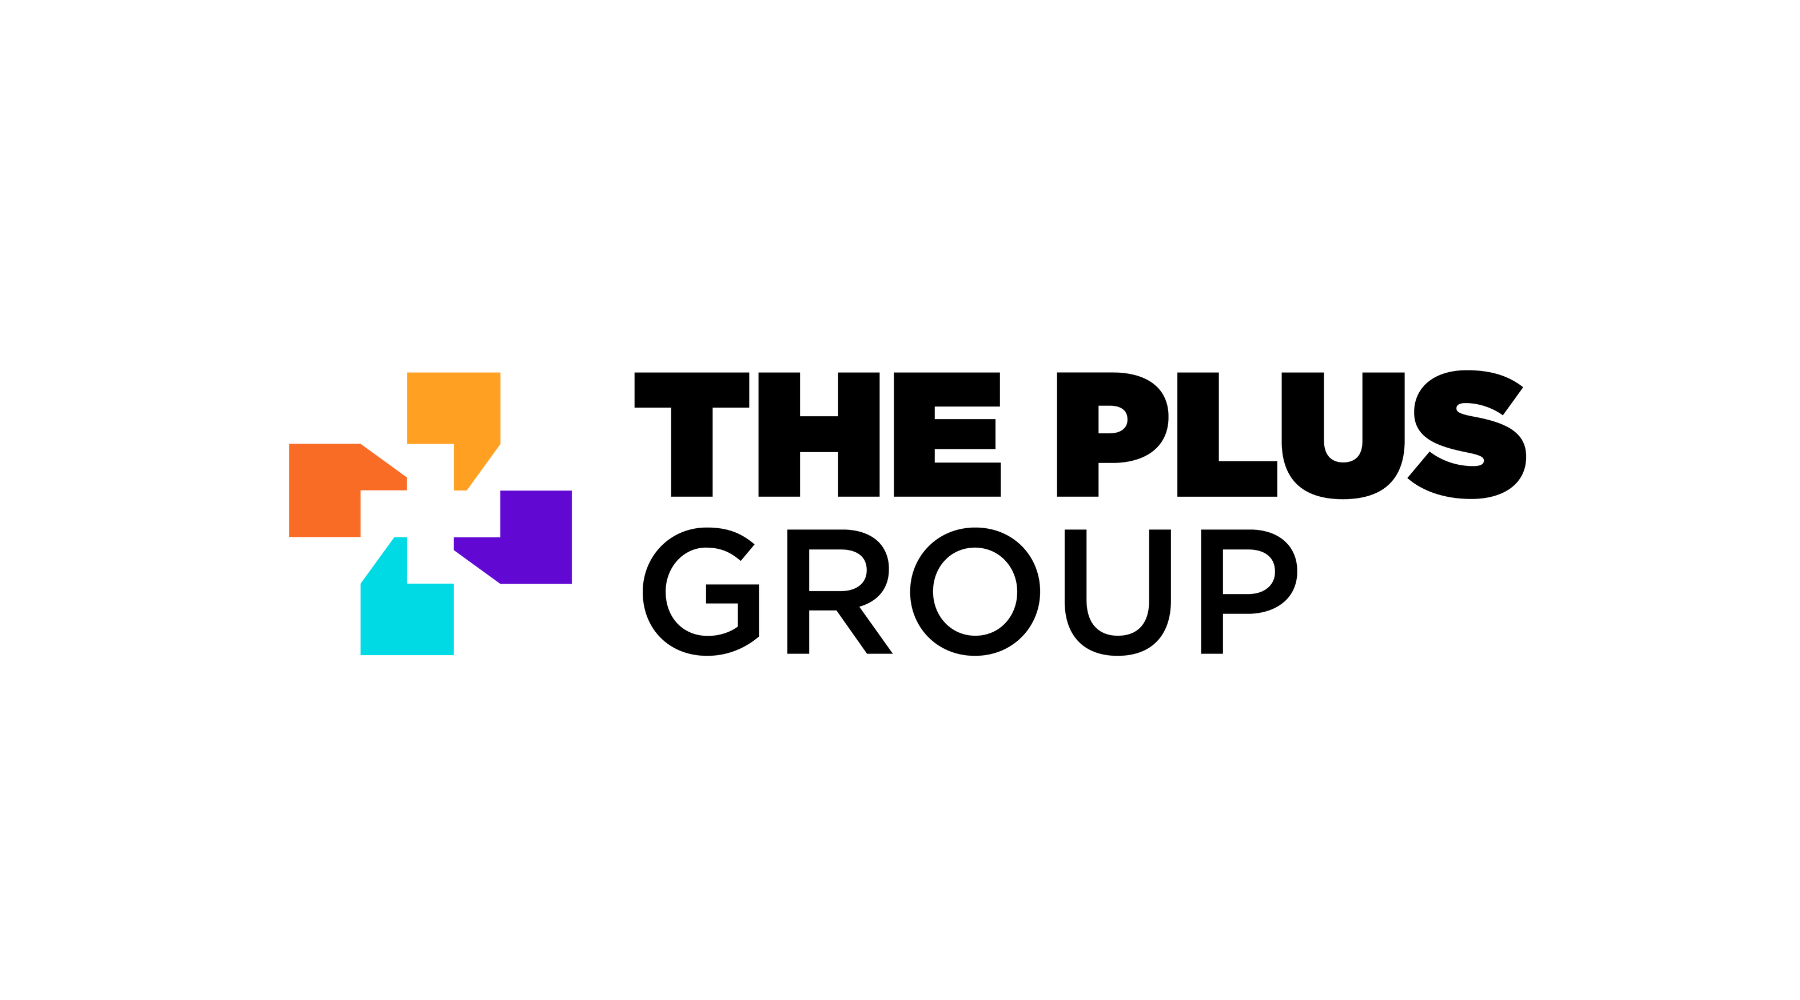 Introducing The Plus Group: Three Agencies Join Forces